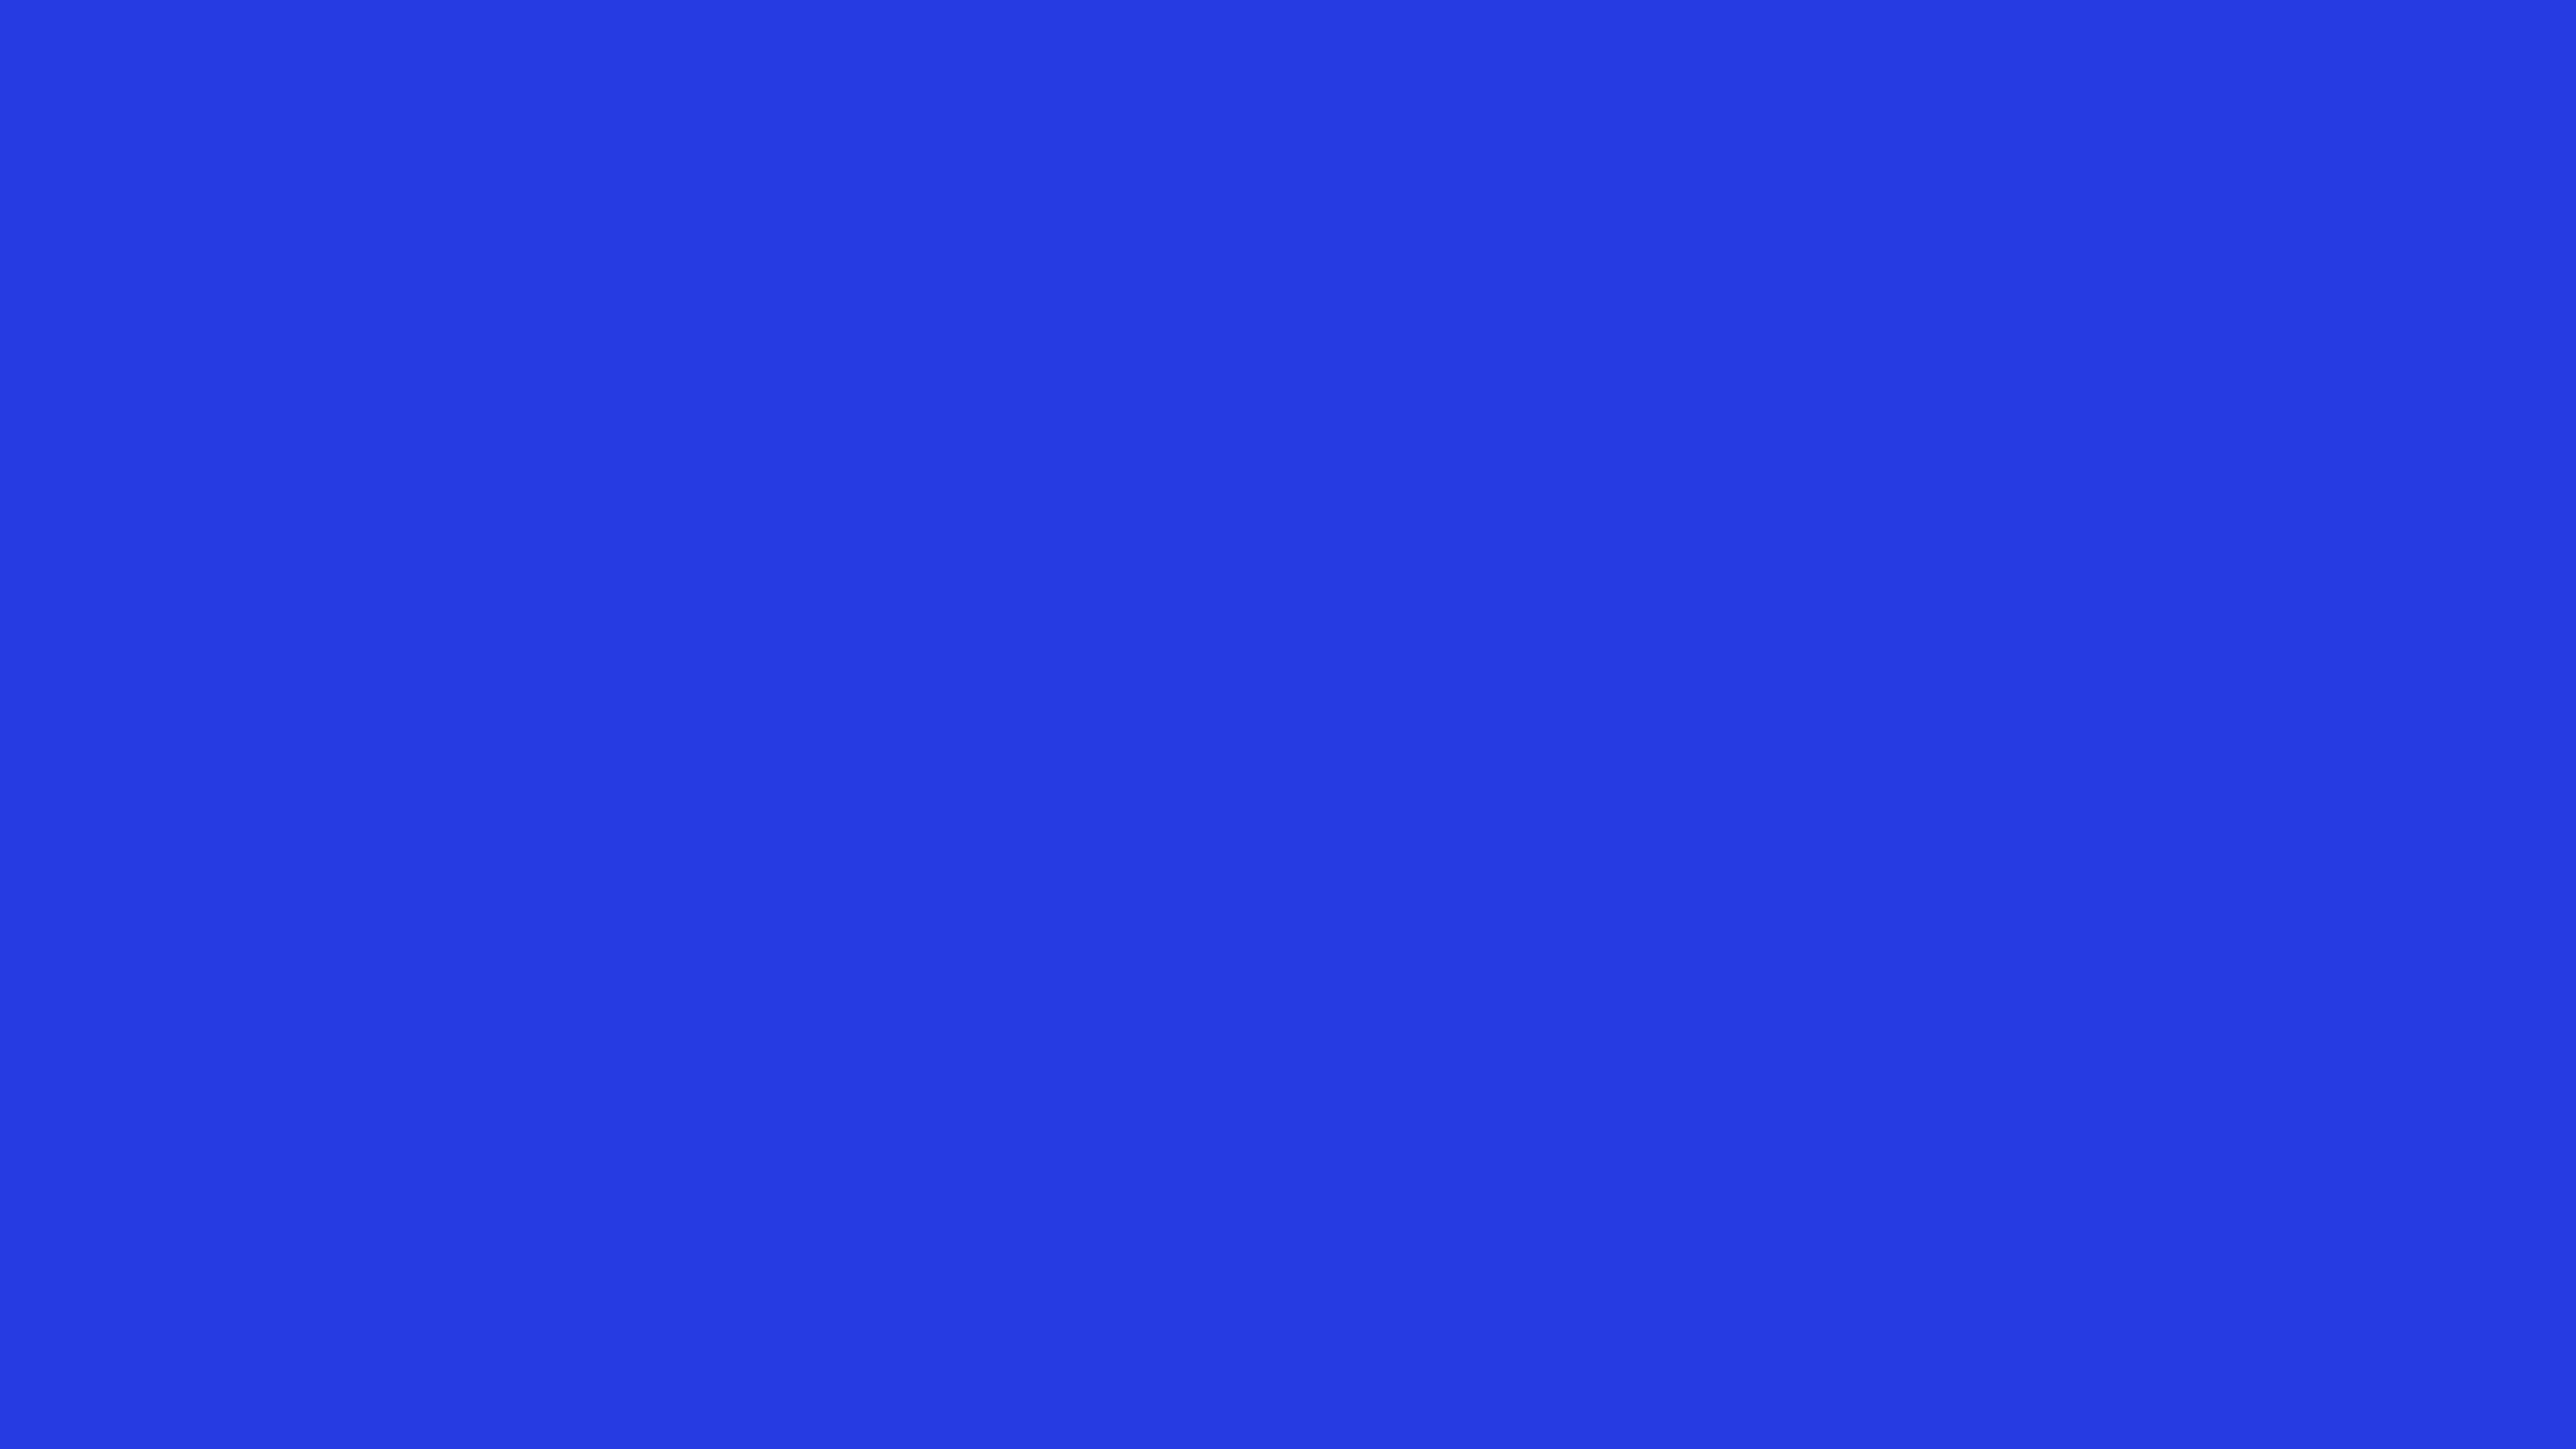 7680x4320 Palatinate Blue Solid Color Background